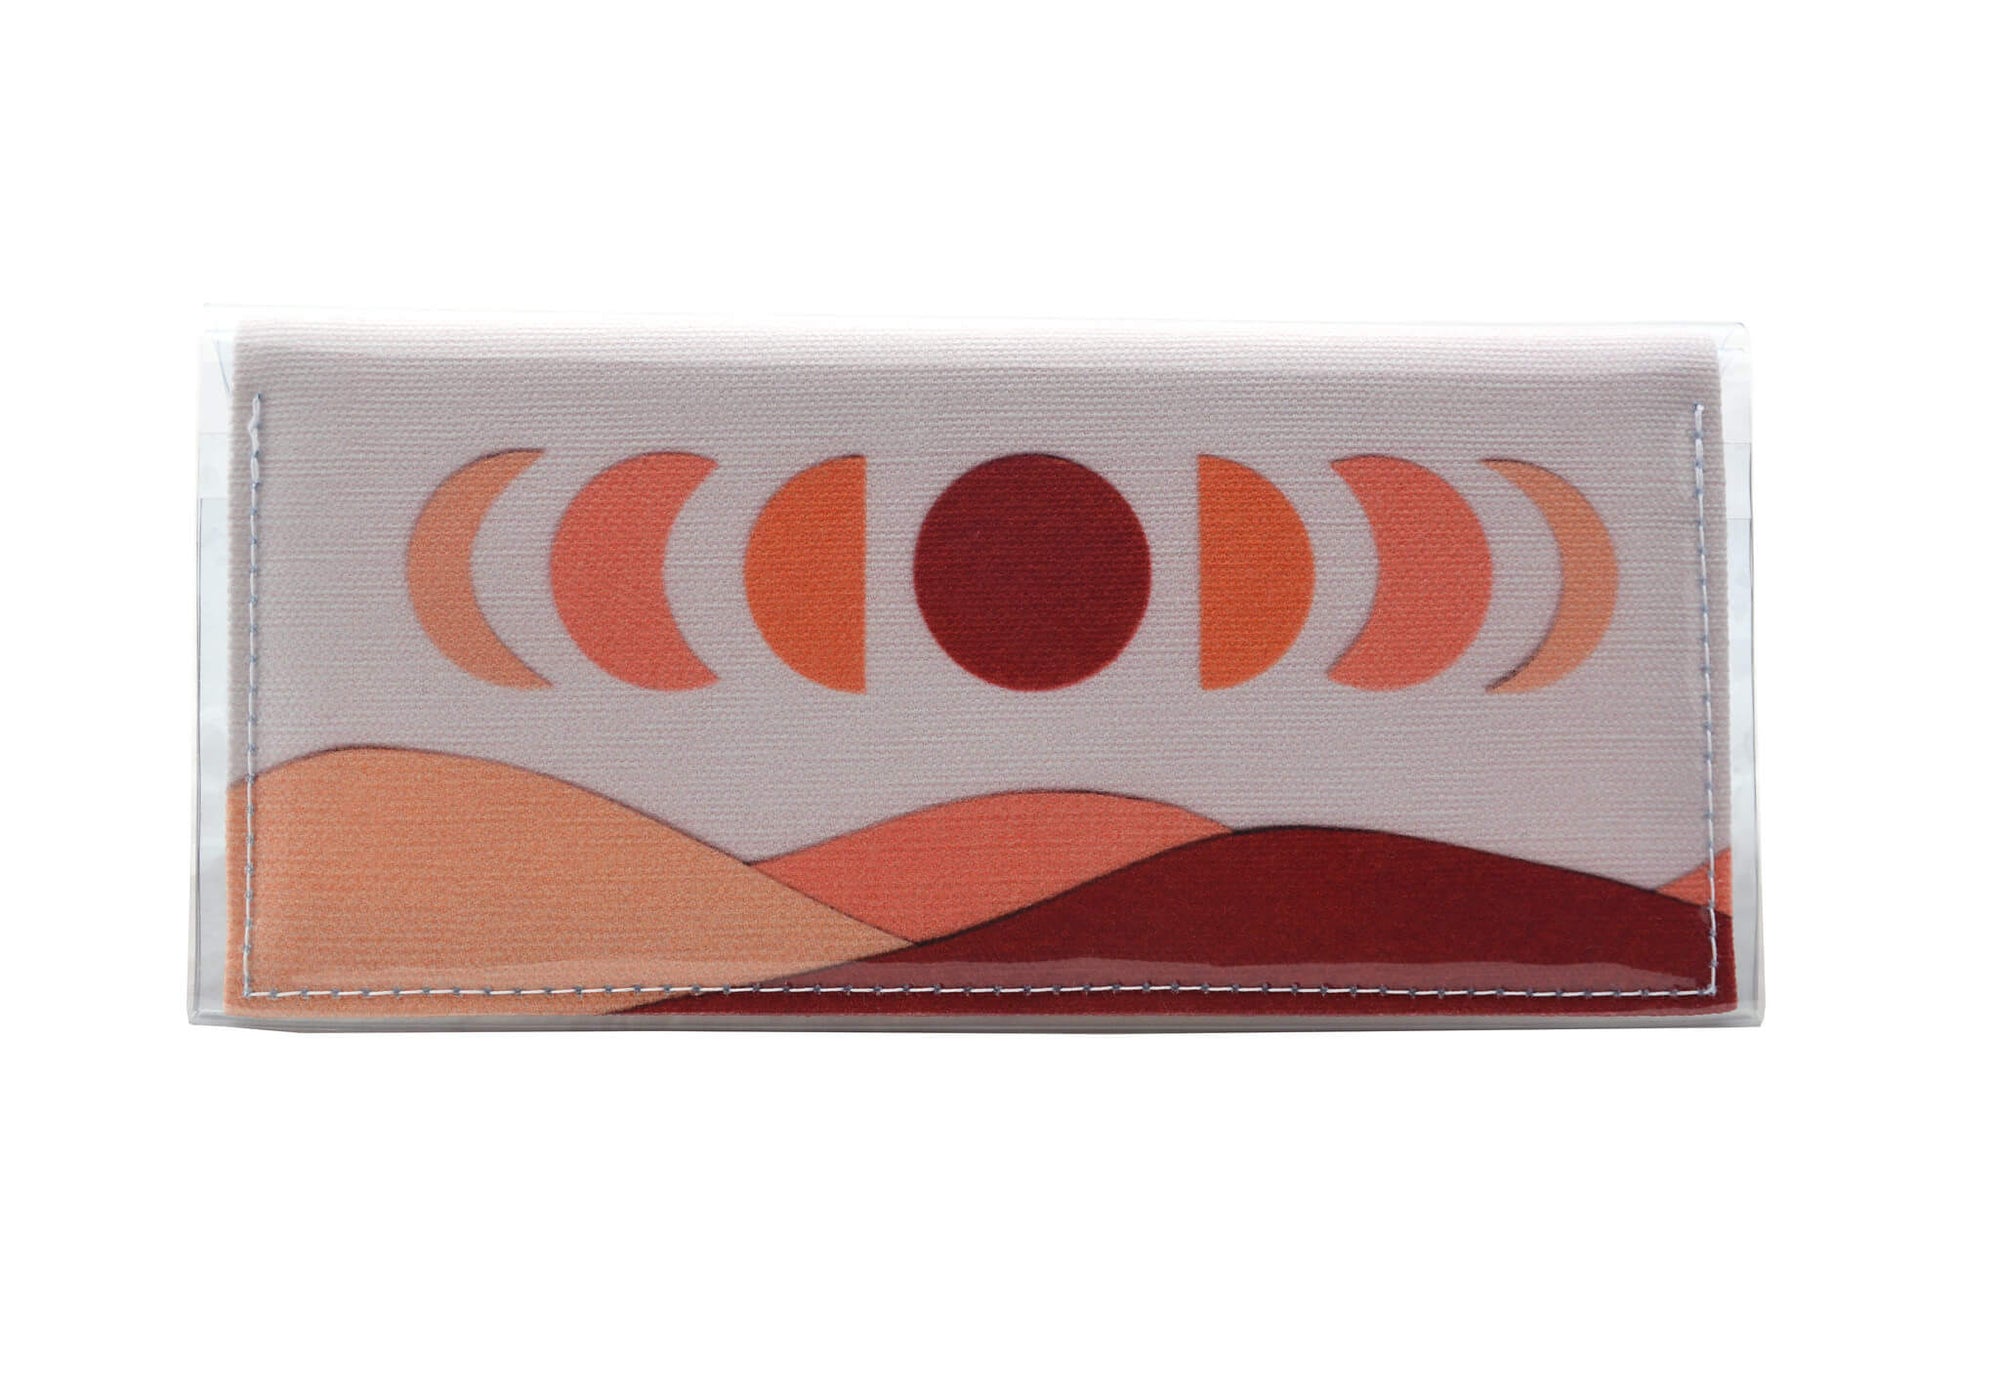 This is an image of the rear of a Kitty Came Home bifold purse clutch in 'The same moon rises' design by Satin and Tat. The moon appears in all its phases in a white sky above a landscape lit by the moon's colours: burgunday, oranges and apricot. This is the standard size.